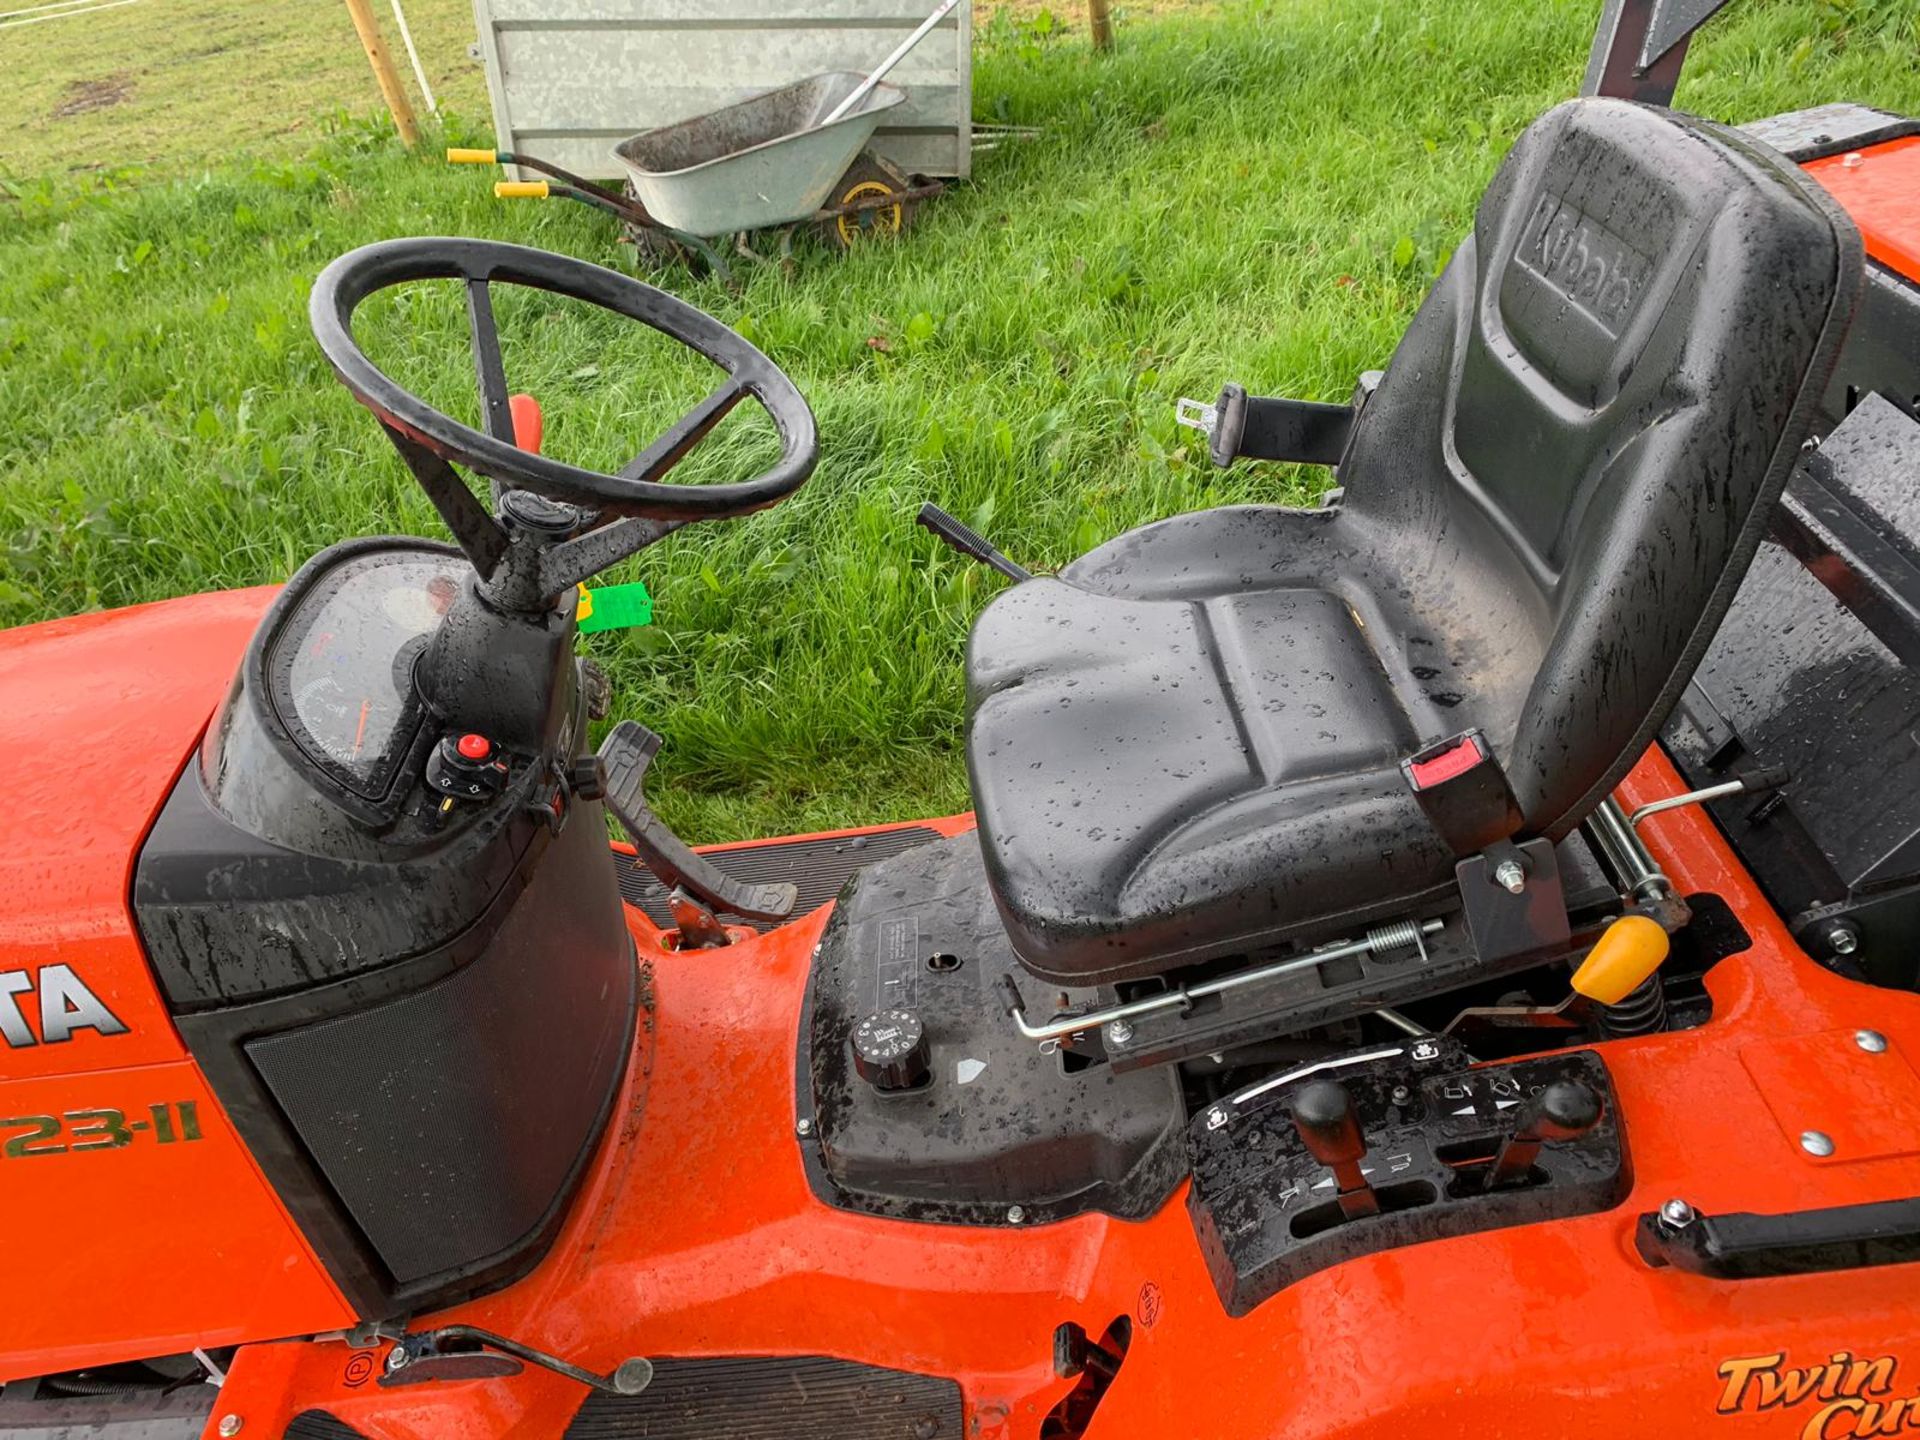 2015 KUBOTA G23-II TWIN CUT LAWN MOWER WITH ROLL BAR, HYDRAULIC TIP, LOW DUMP COLLECTOR *PLUS VAT* - Image 13 of 15